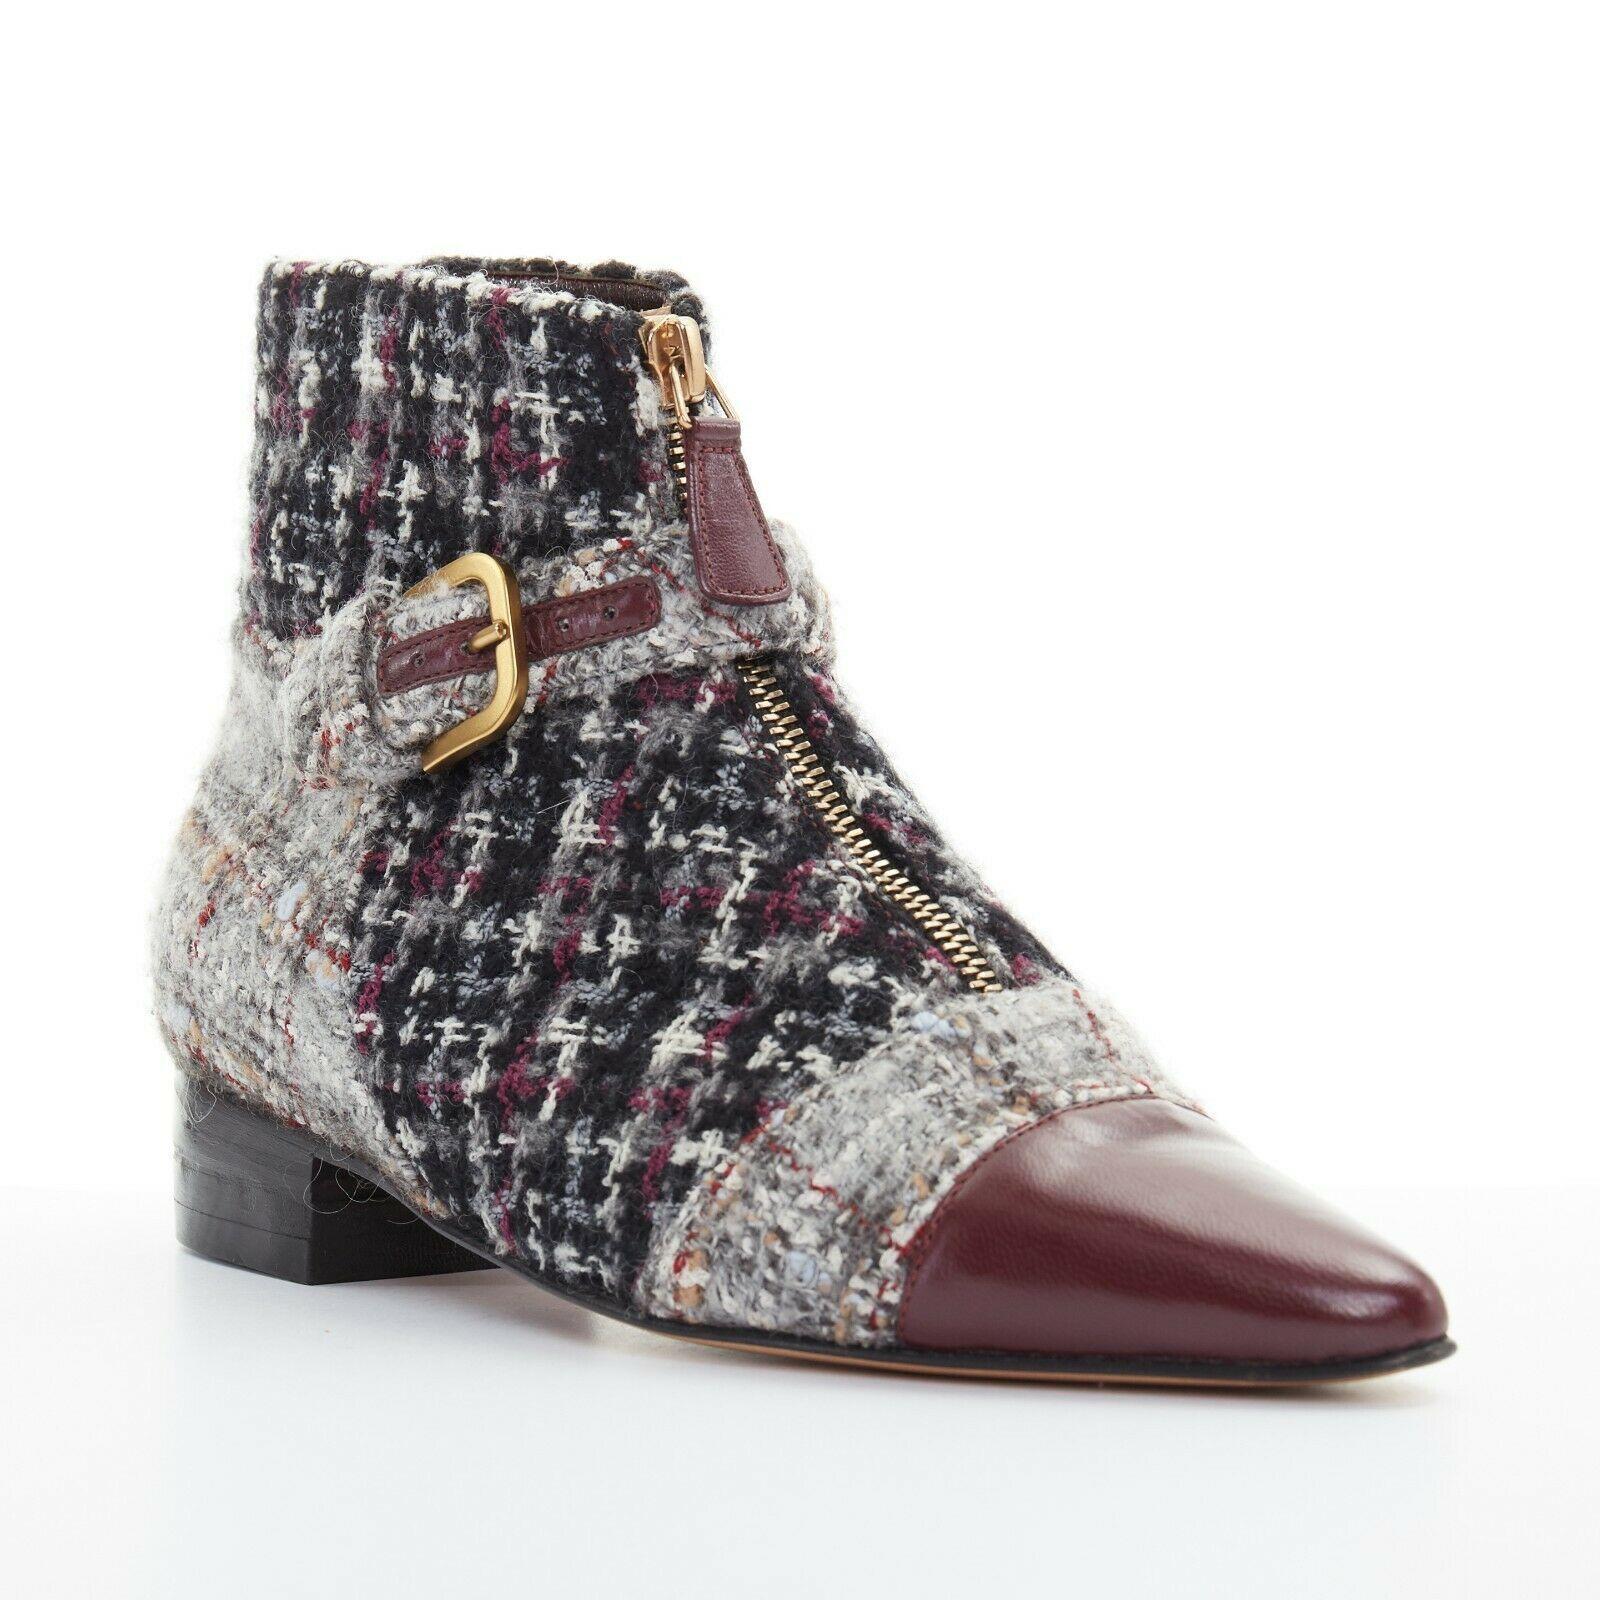 new CHANEL grey tweed red pointed toe cap zip buckle ankle bootie shoe EU35.5C
CHANEL
Mixed grey checked tweed upper. 
Maroon red leather toe cap. 
Rounded point toe. 
Gold-tone hardware zipped closure at front. 
Cross strap buckle detail at front.